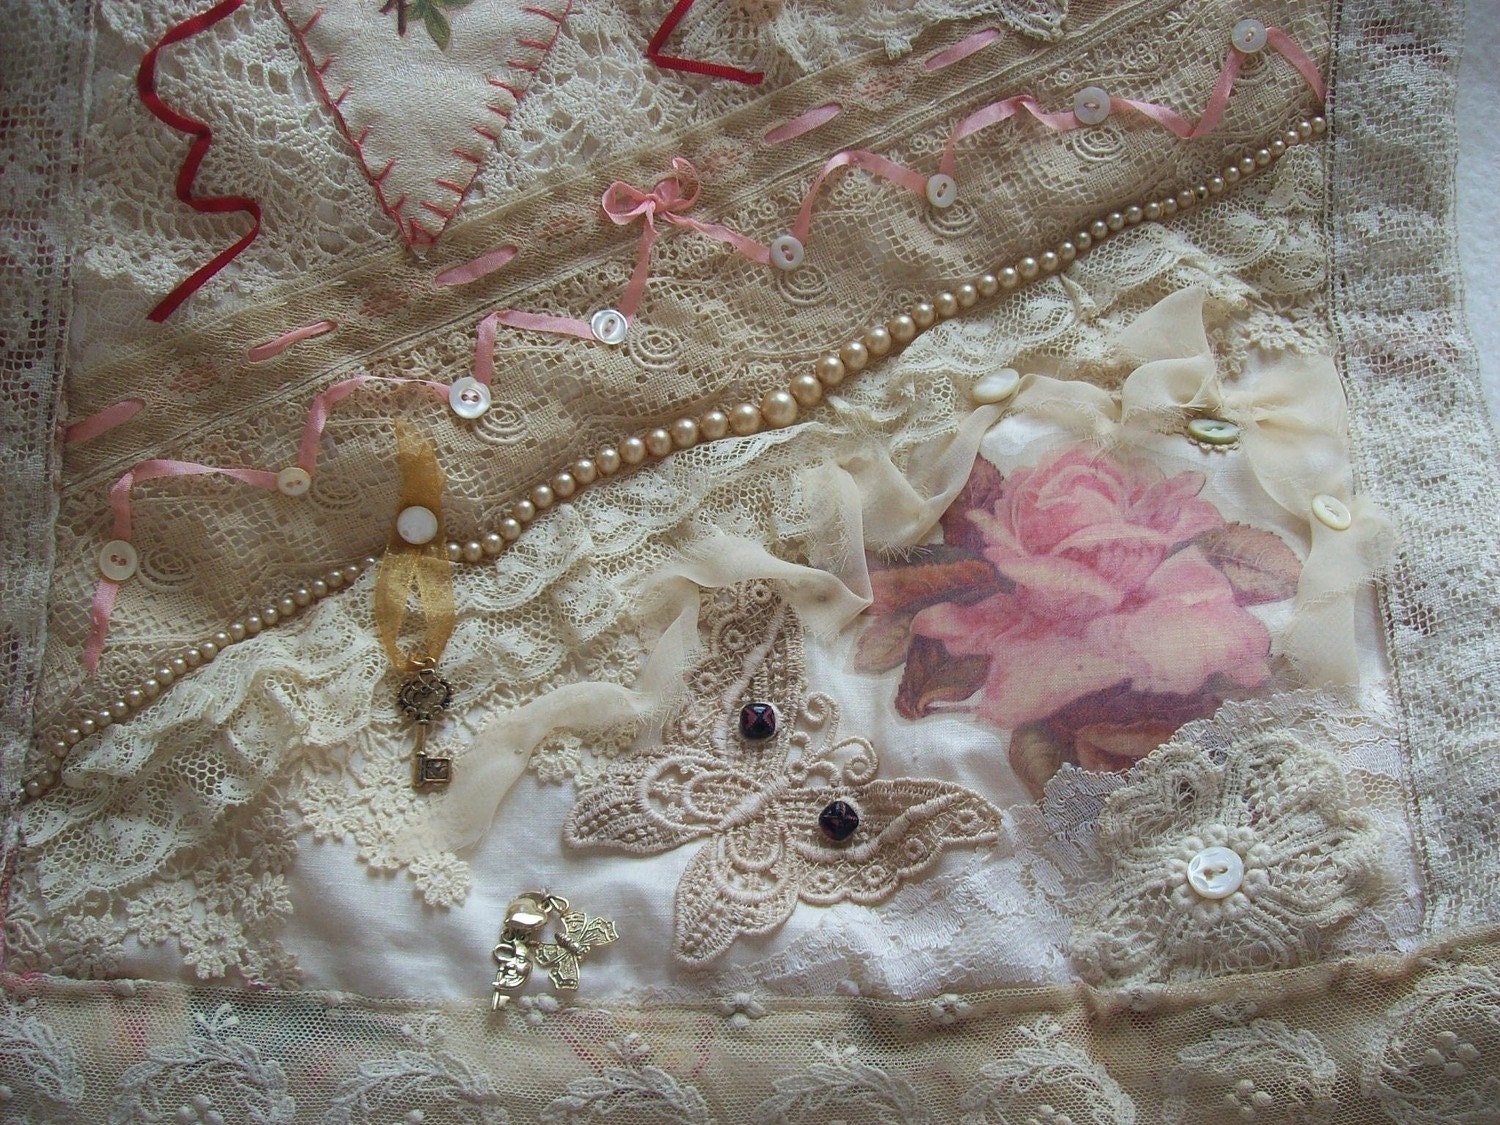 Victorian Charm Fabric and Lace Collage Wall Decor